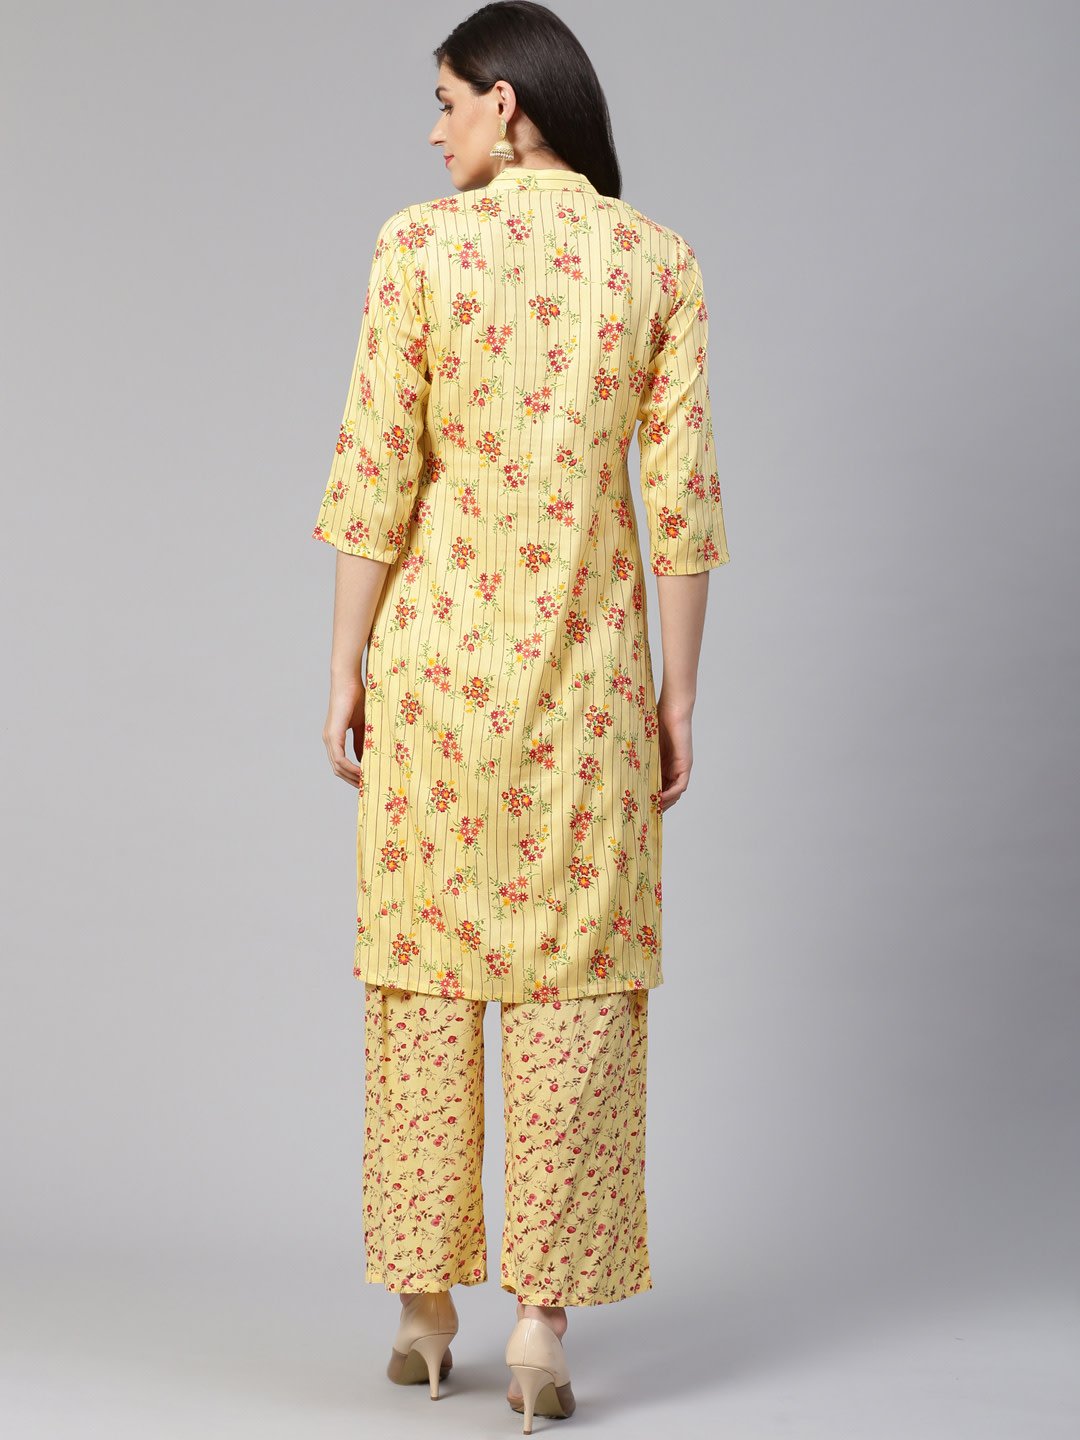 Women's Yellow Coloured & Red Floral Print Kurta with Palazzos - Jompers